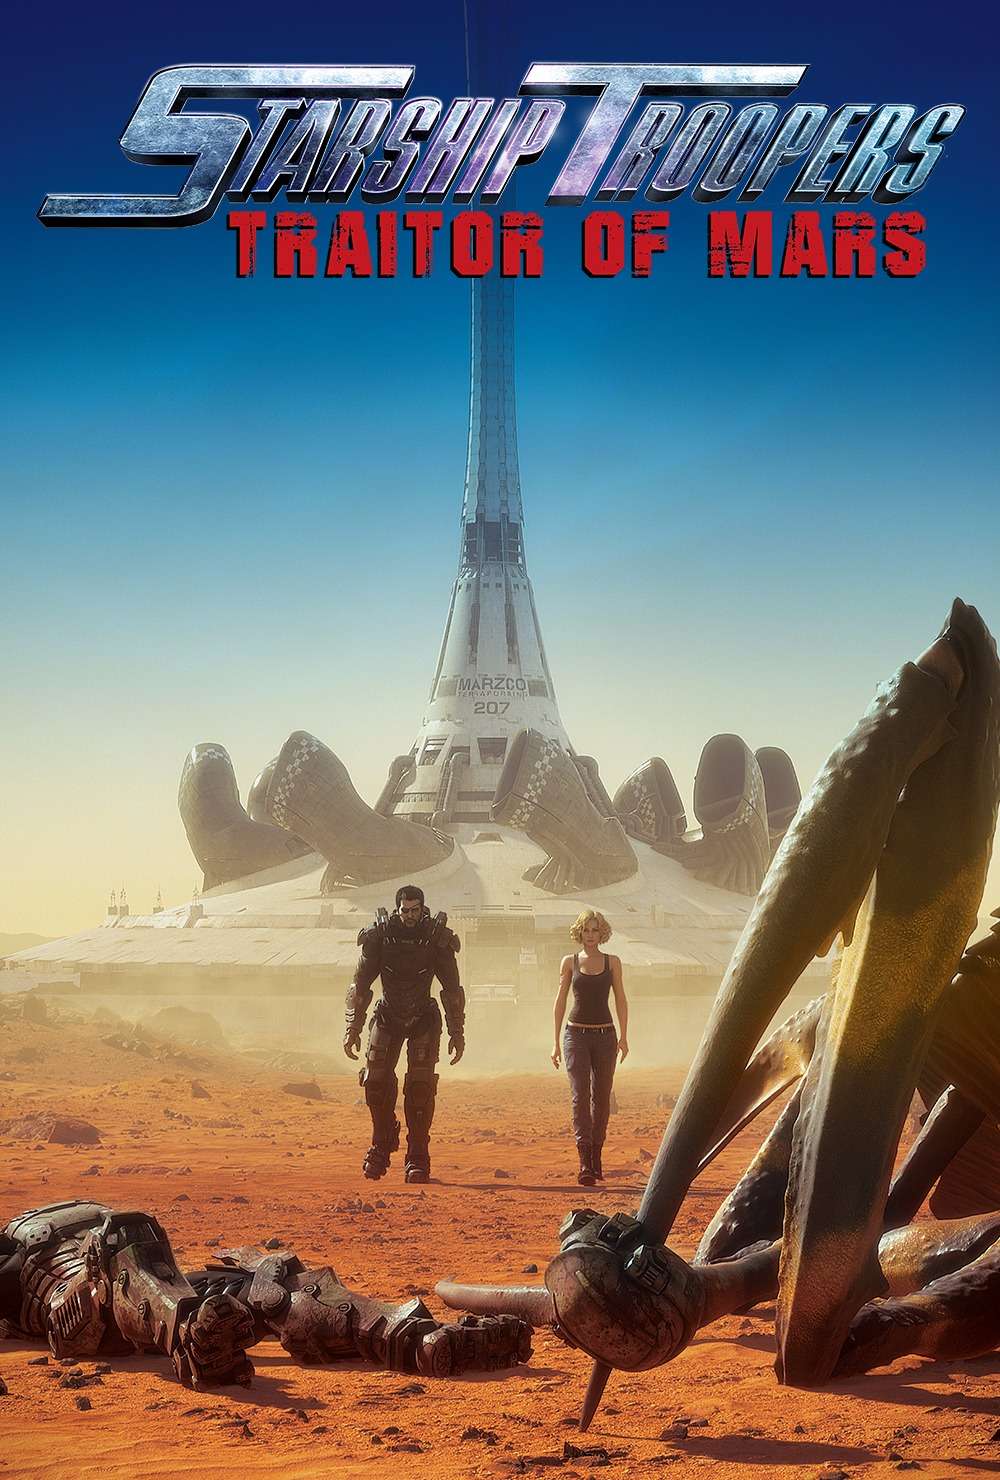 Starship Troopers Traitor of Mars - Based On The Starship Troopers Movies